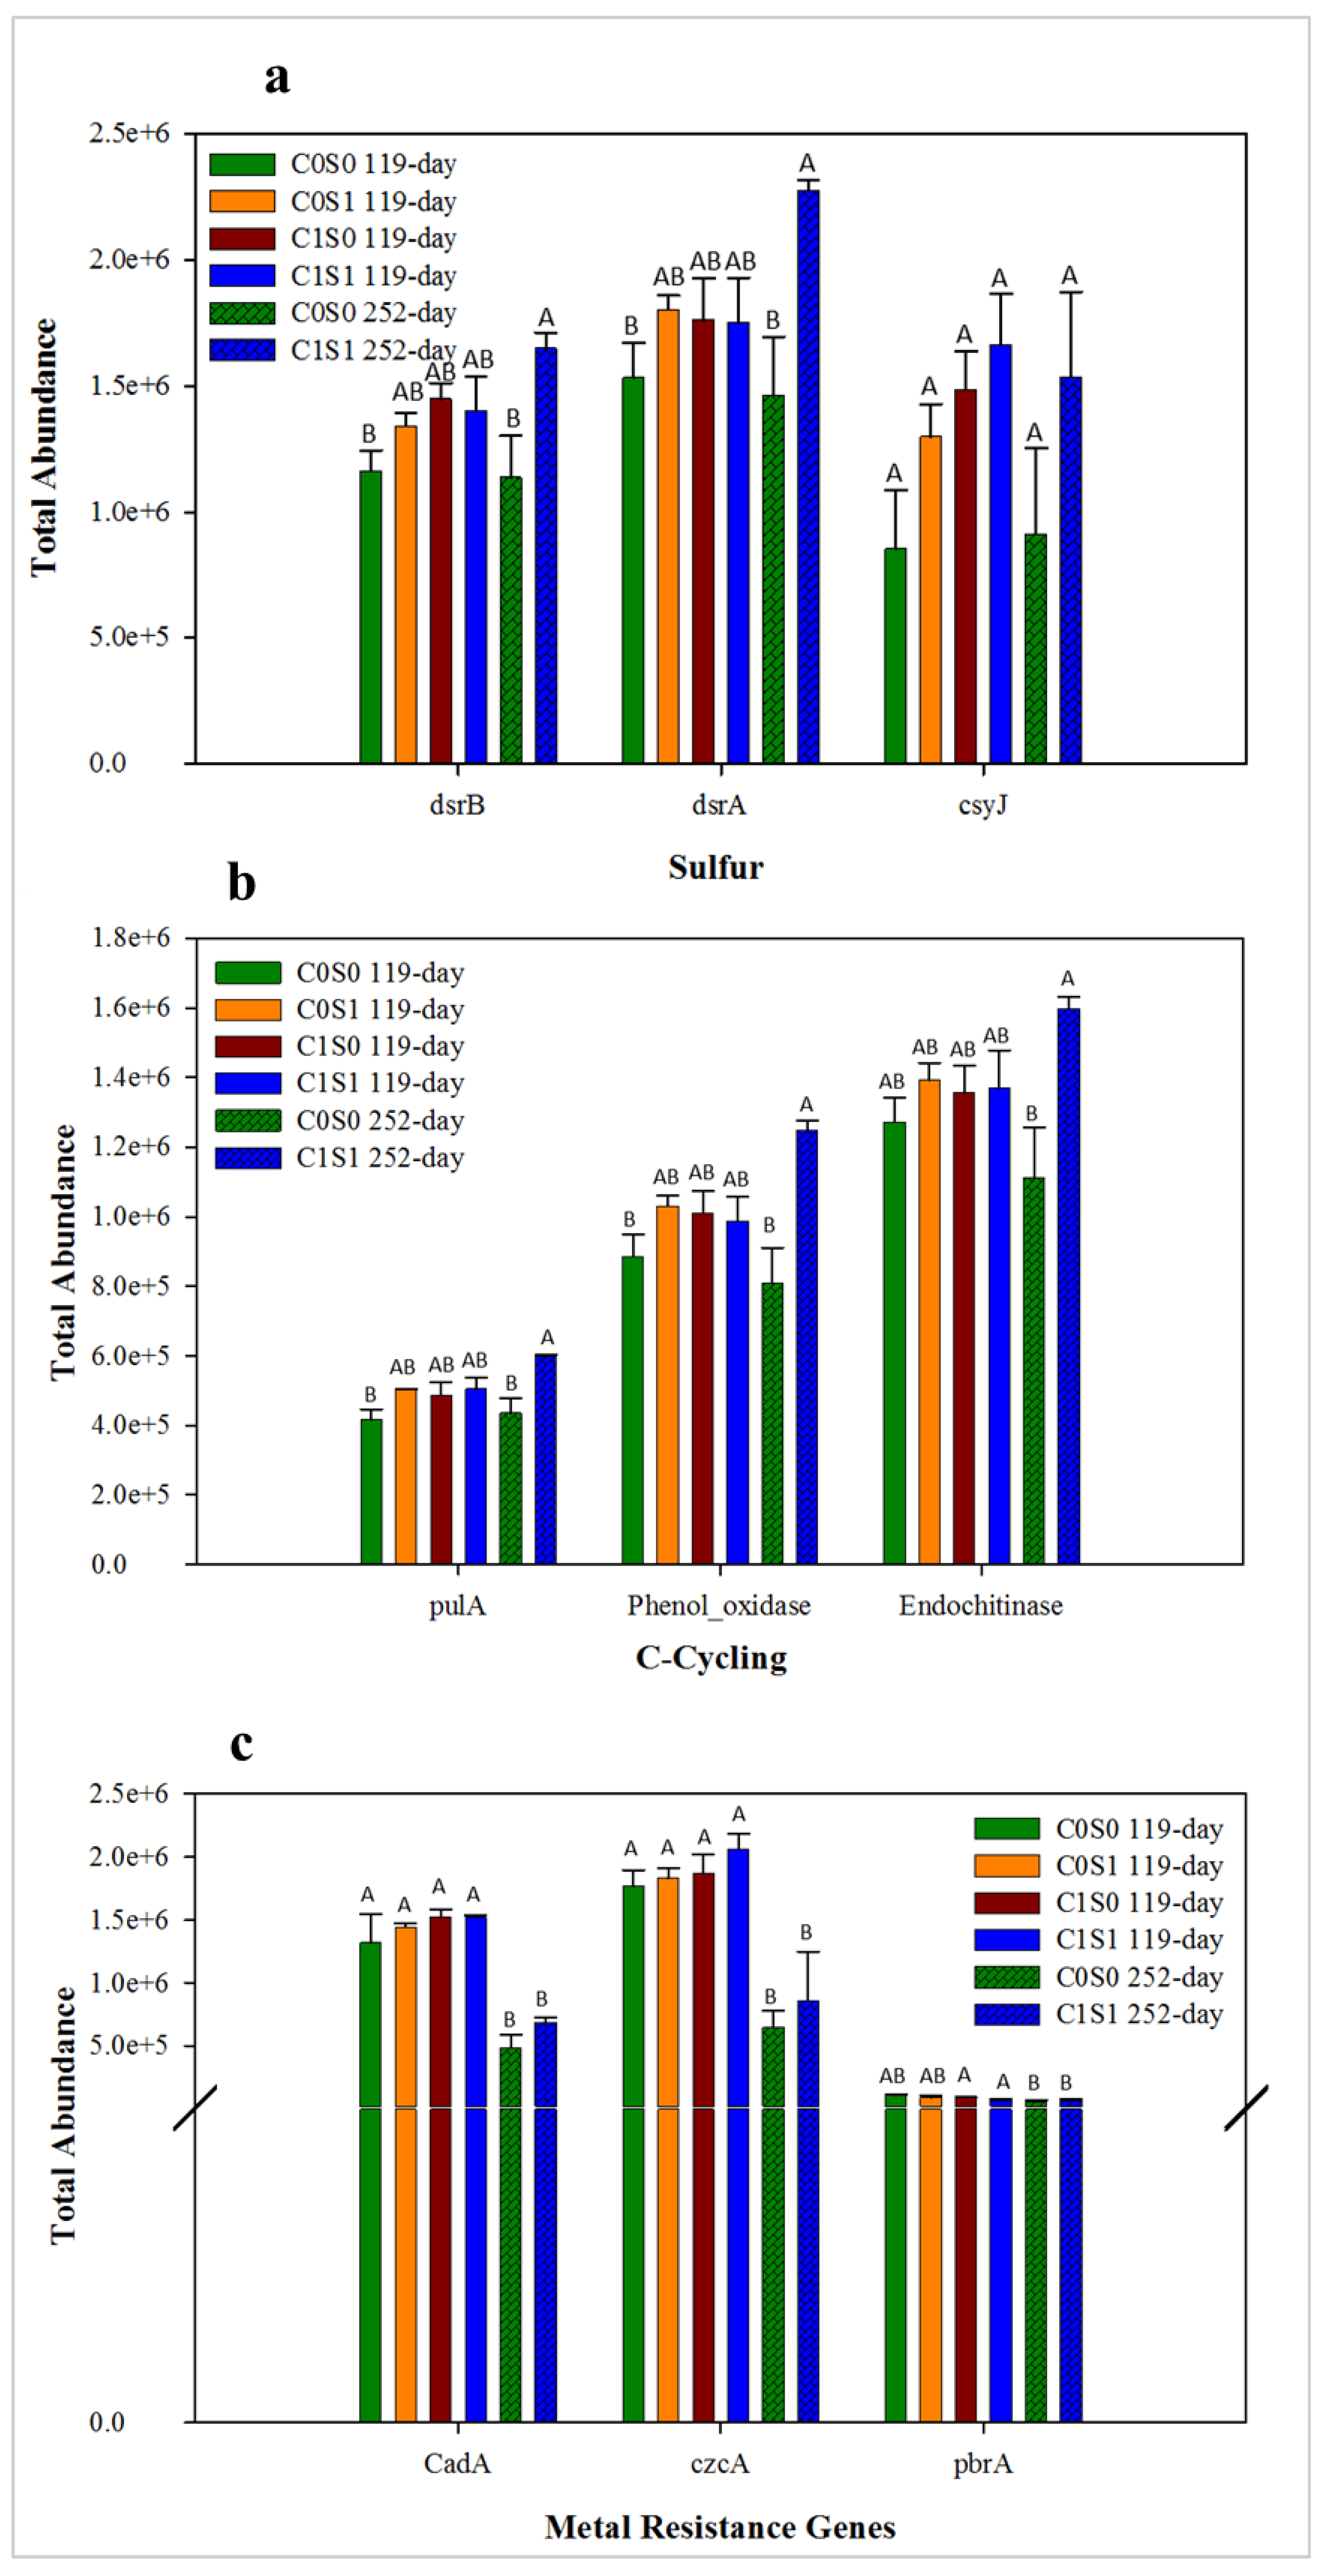 Soil Syst Free Full Text Microbial Population Dynamics And The Role Of Sulfate Reducing Bacteria Genes In Stabilizing Pb Zn And Cd In The Terrestrial Subsurface Html - dsrb experimental roblox